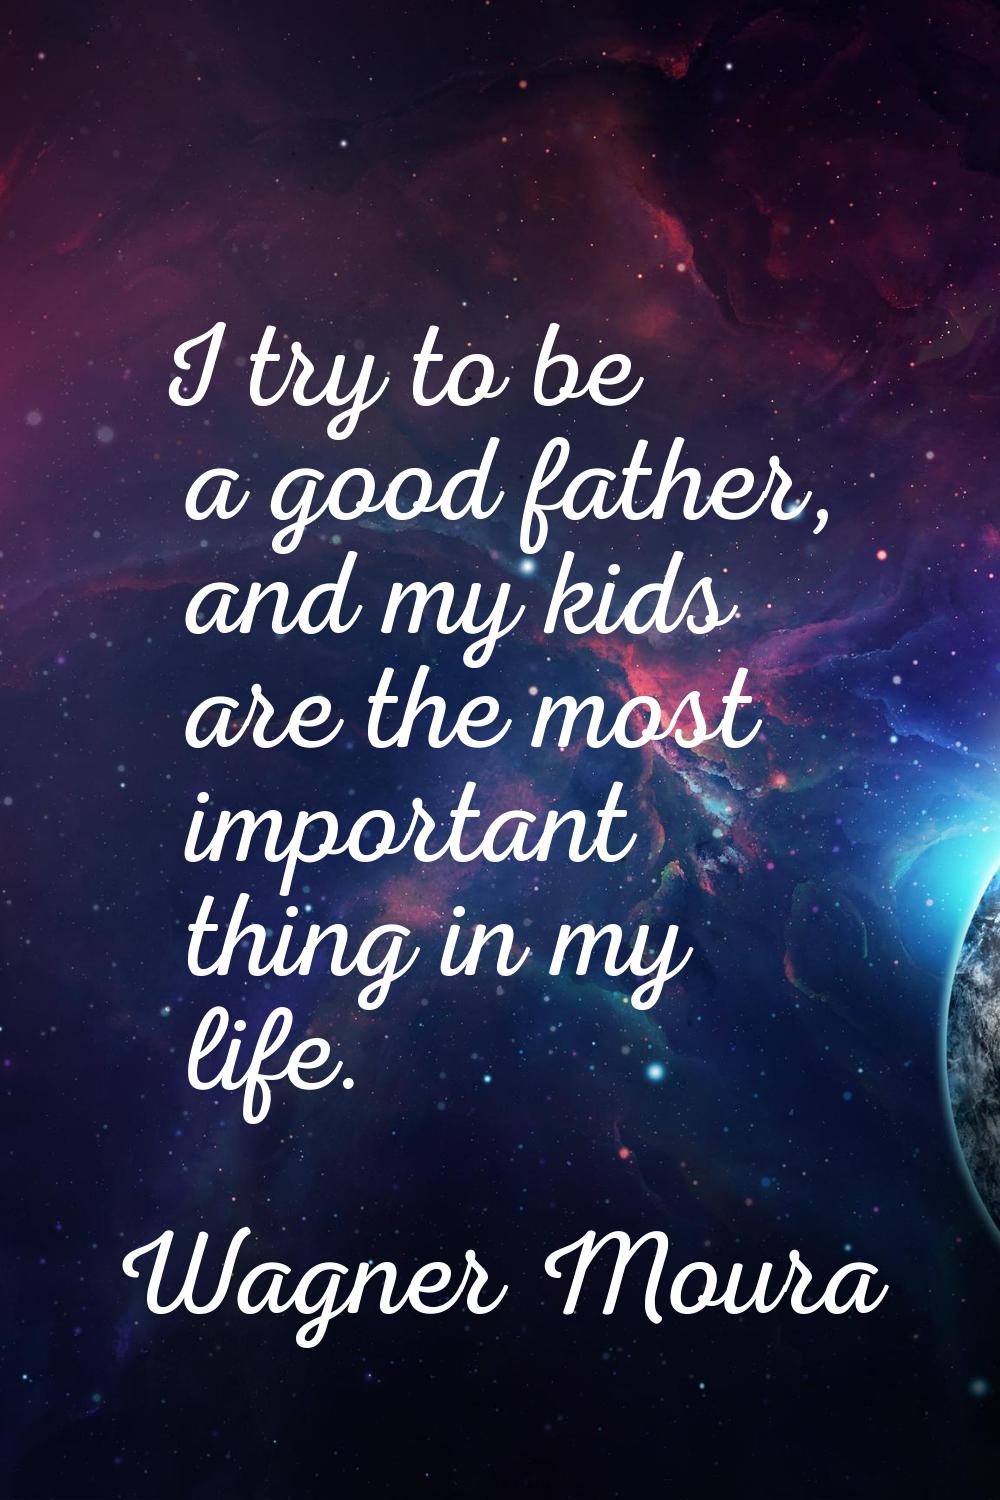 I try to be a good father, and my kids are the most important thing in my life.